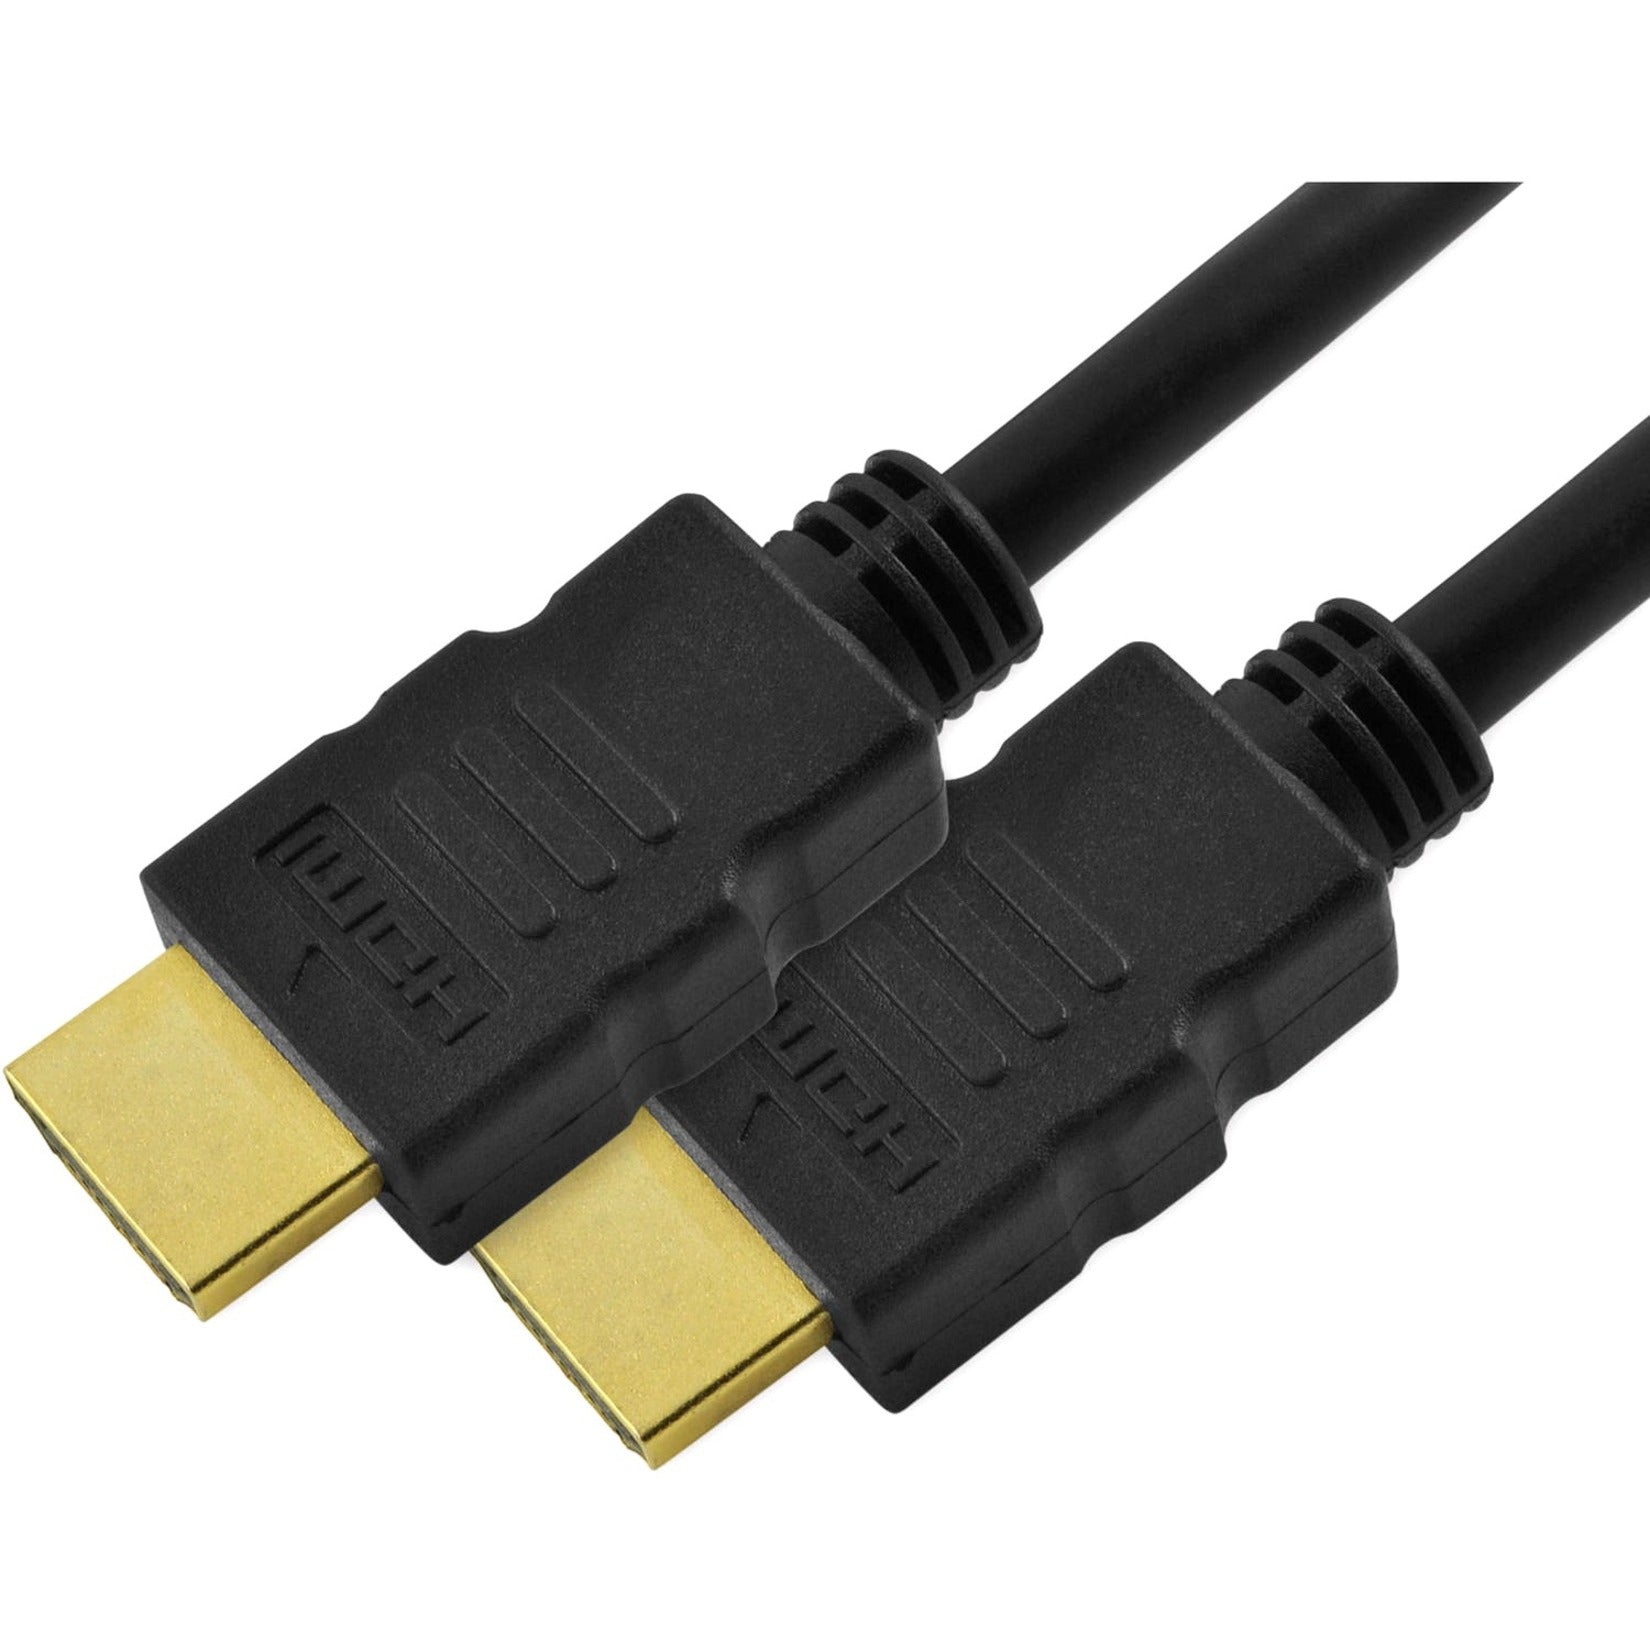 4XEM 4XHDMI4K2KPRO25 25ft Ultra High Speed 4K2K HDMI Cable, EMI/RF Protection, Gold-plated Connectors, Black